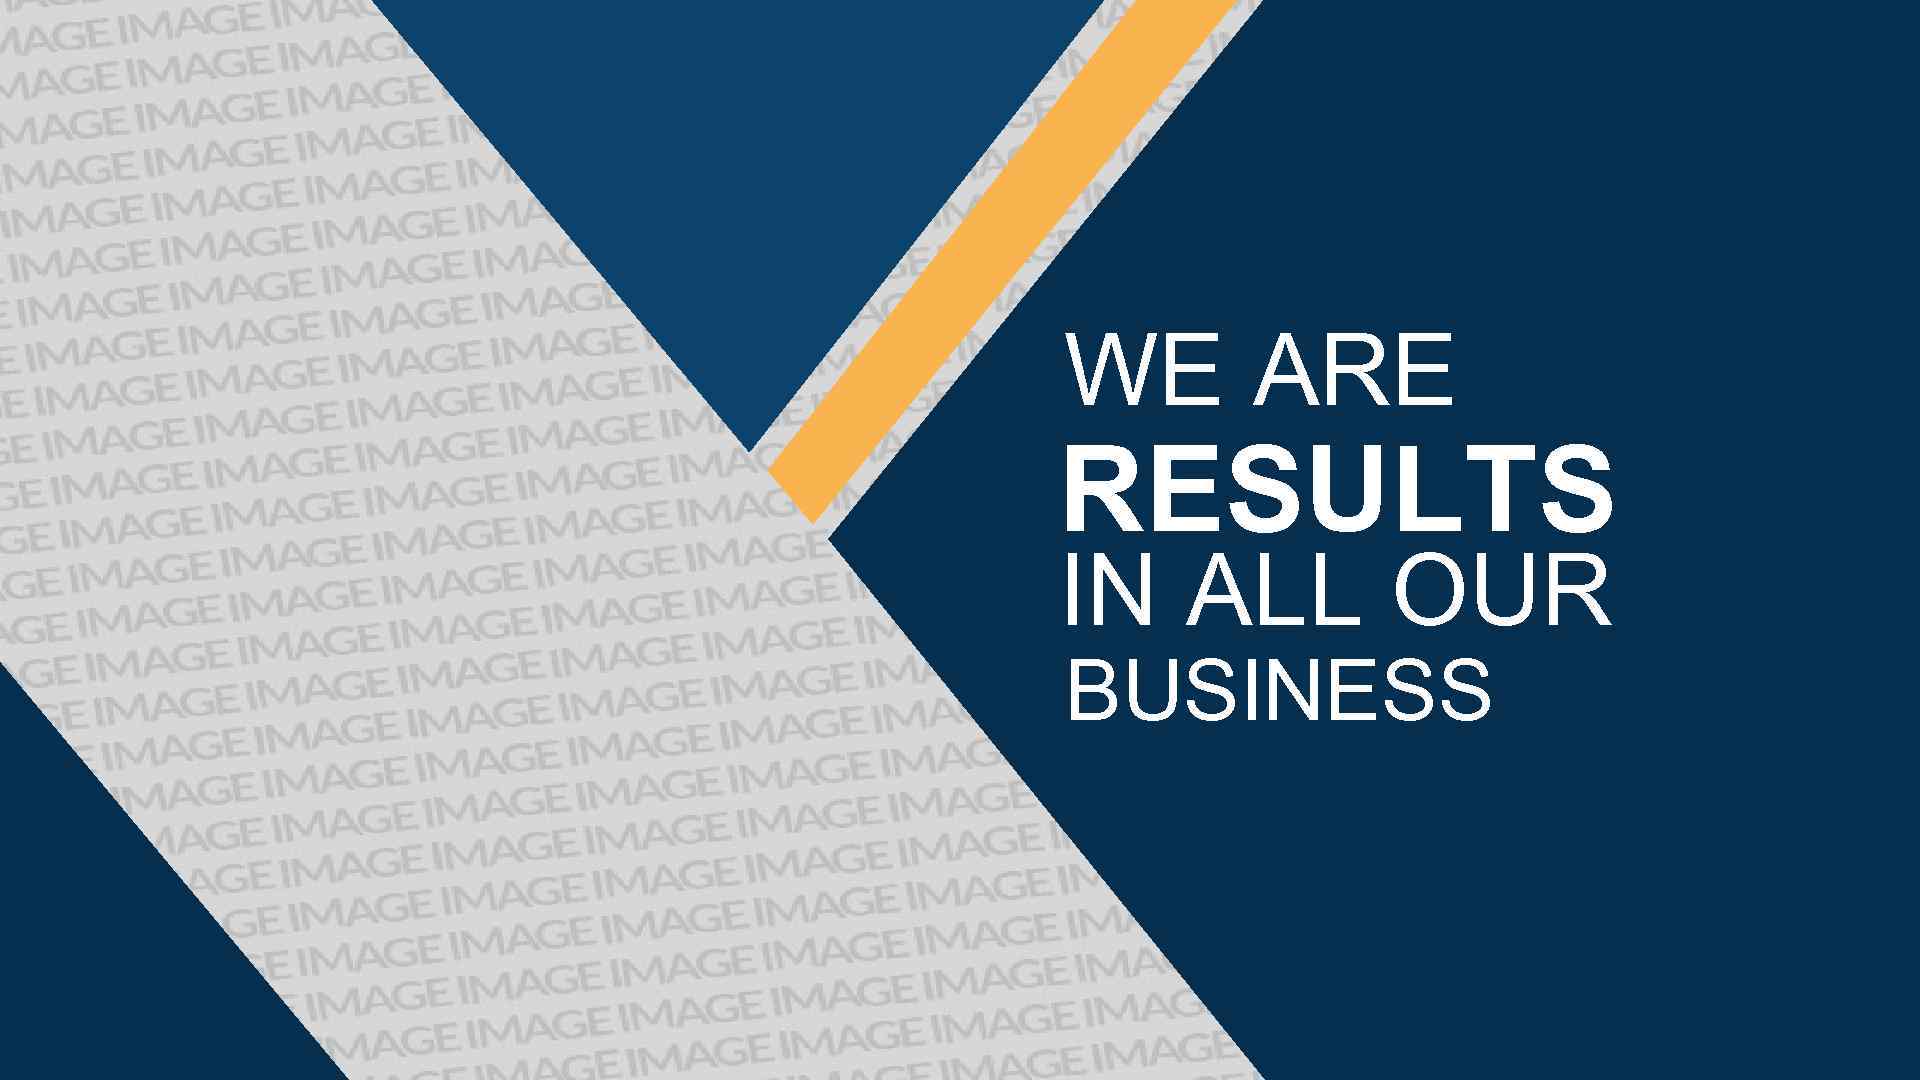 WE ARE RESULTS IN ALL OUR BUSINESS 